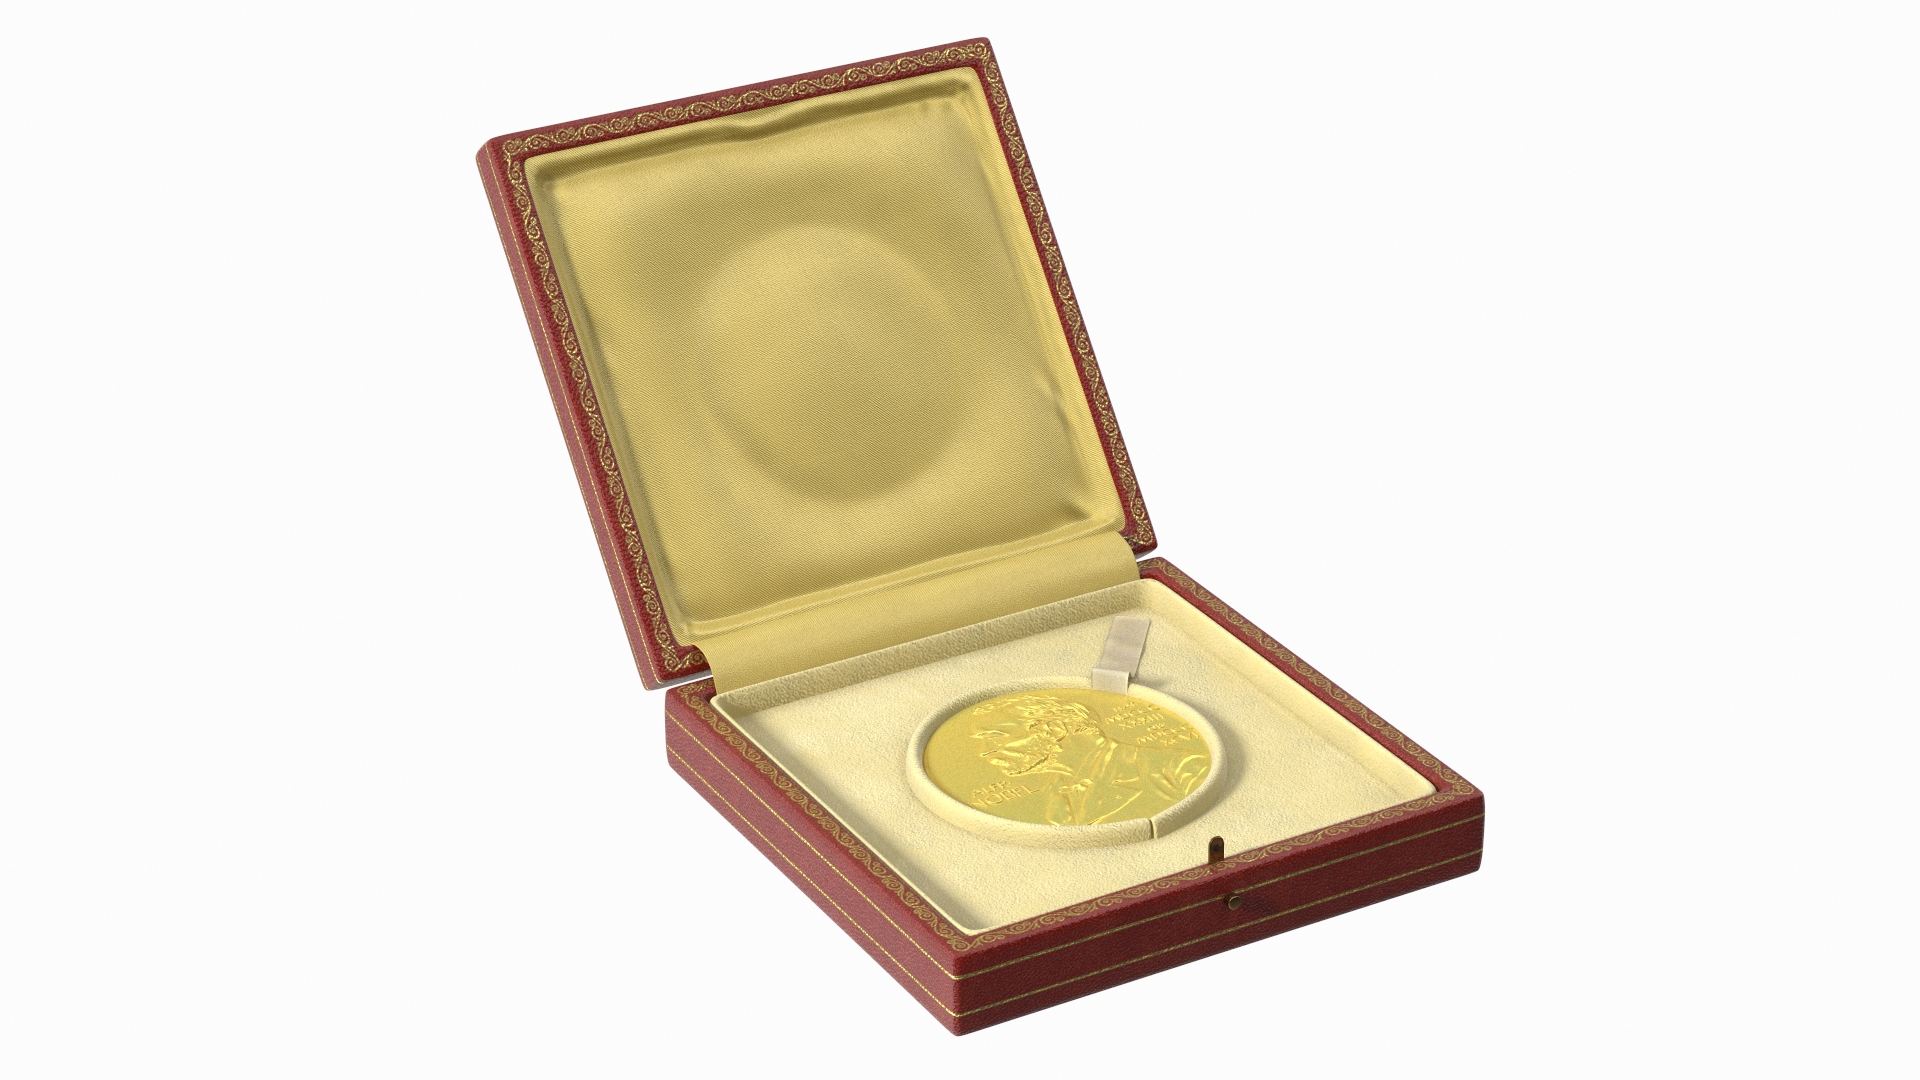 3D Nobel Prize with Box for Physics and Chemistry model https://p.turbosquid.com/ts-thumb/tx/29uwq8/KG/nobel_prize_with_box_for_physics_and_chemistry_360/jpg/1644515554/1920x1080/turn_fit_q99/27231c9a89f169cc1bce543b70c7b5ae76fc1e85/nobel_prize_with_box_for_physics_and_chemistry_360-1.jpg